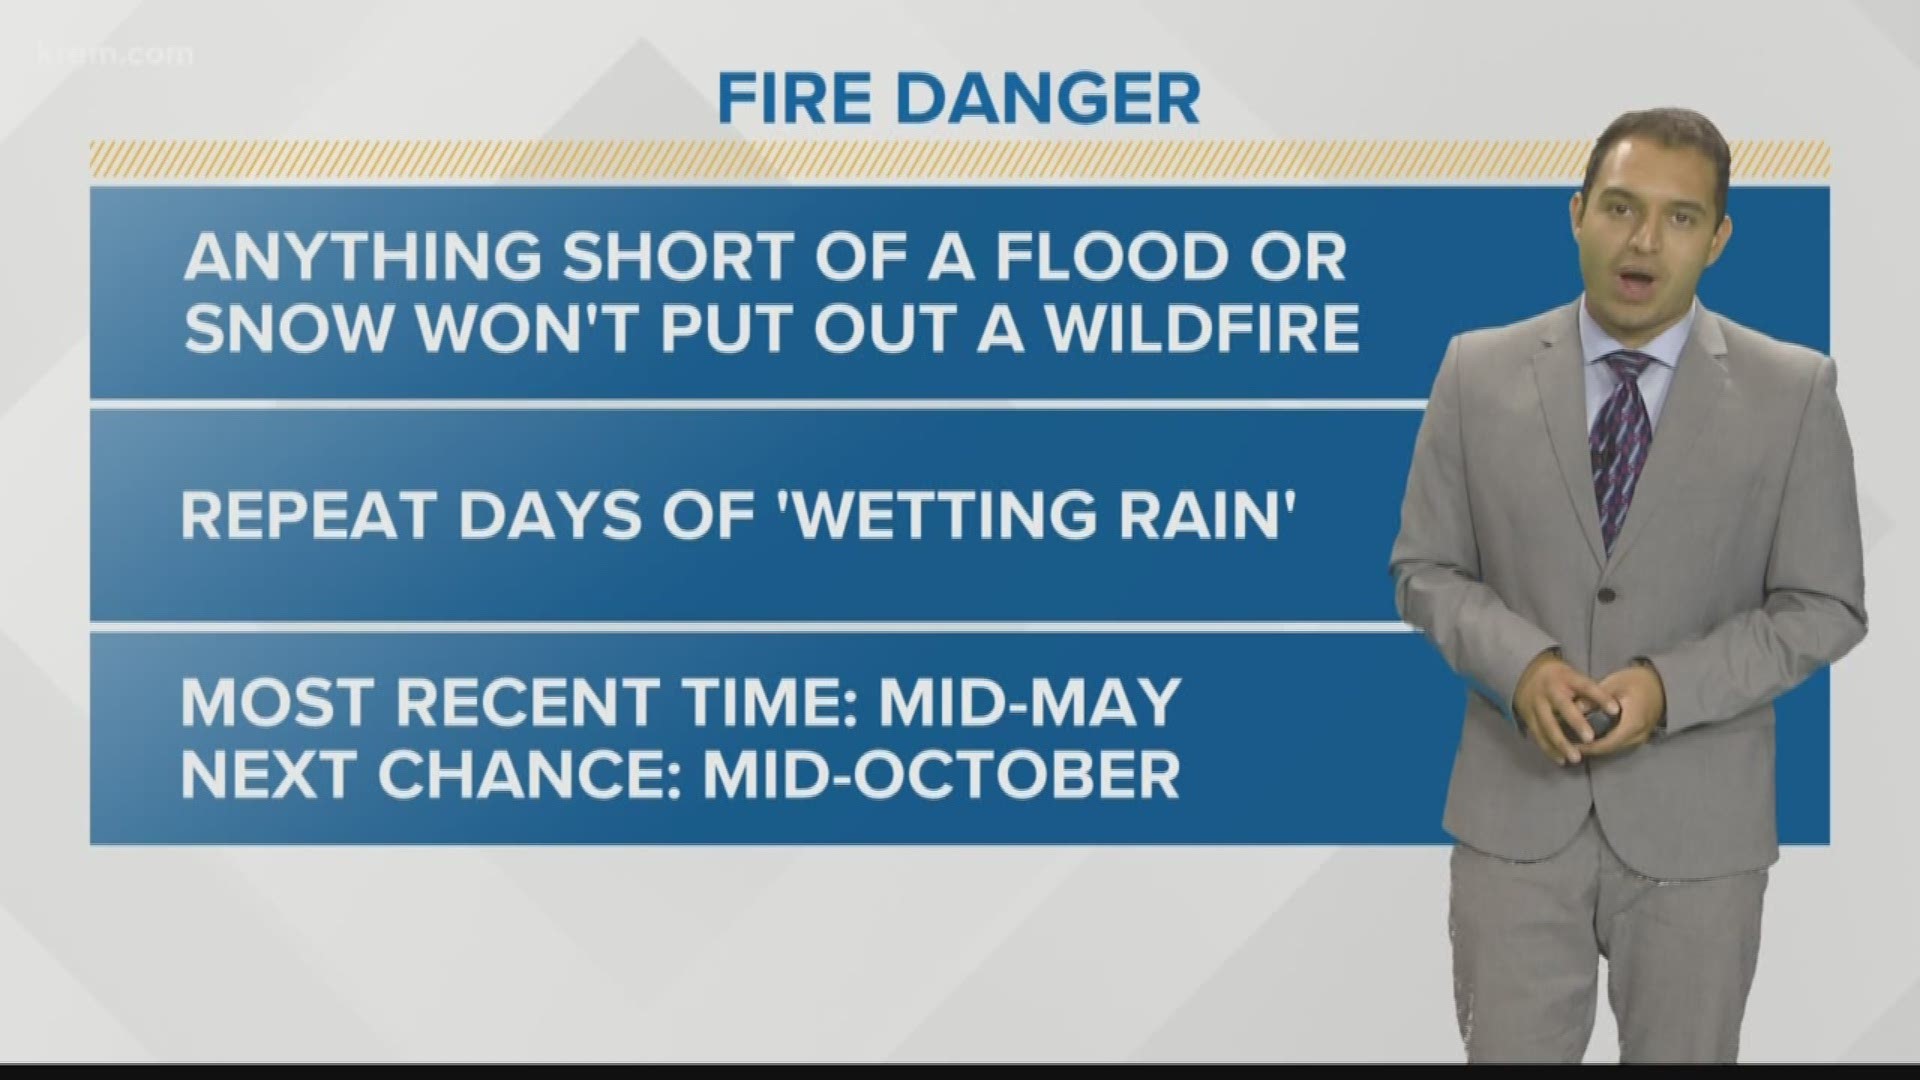 Anything short of flood would not decrease fire danger around the region (8-17-18)